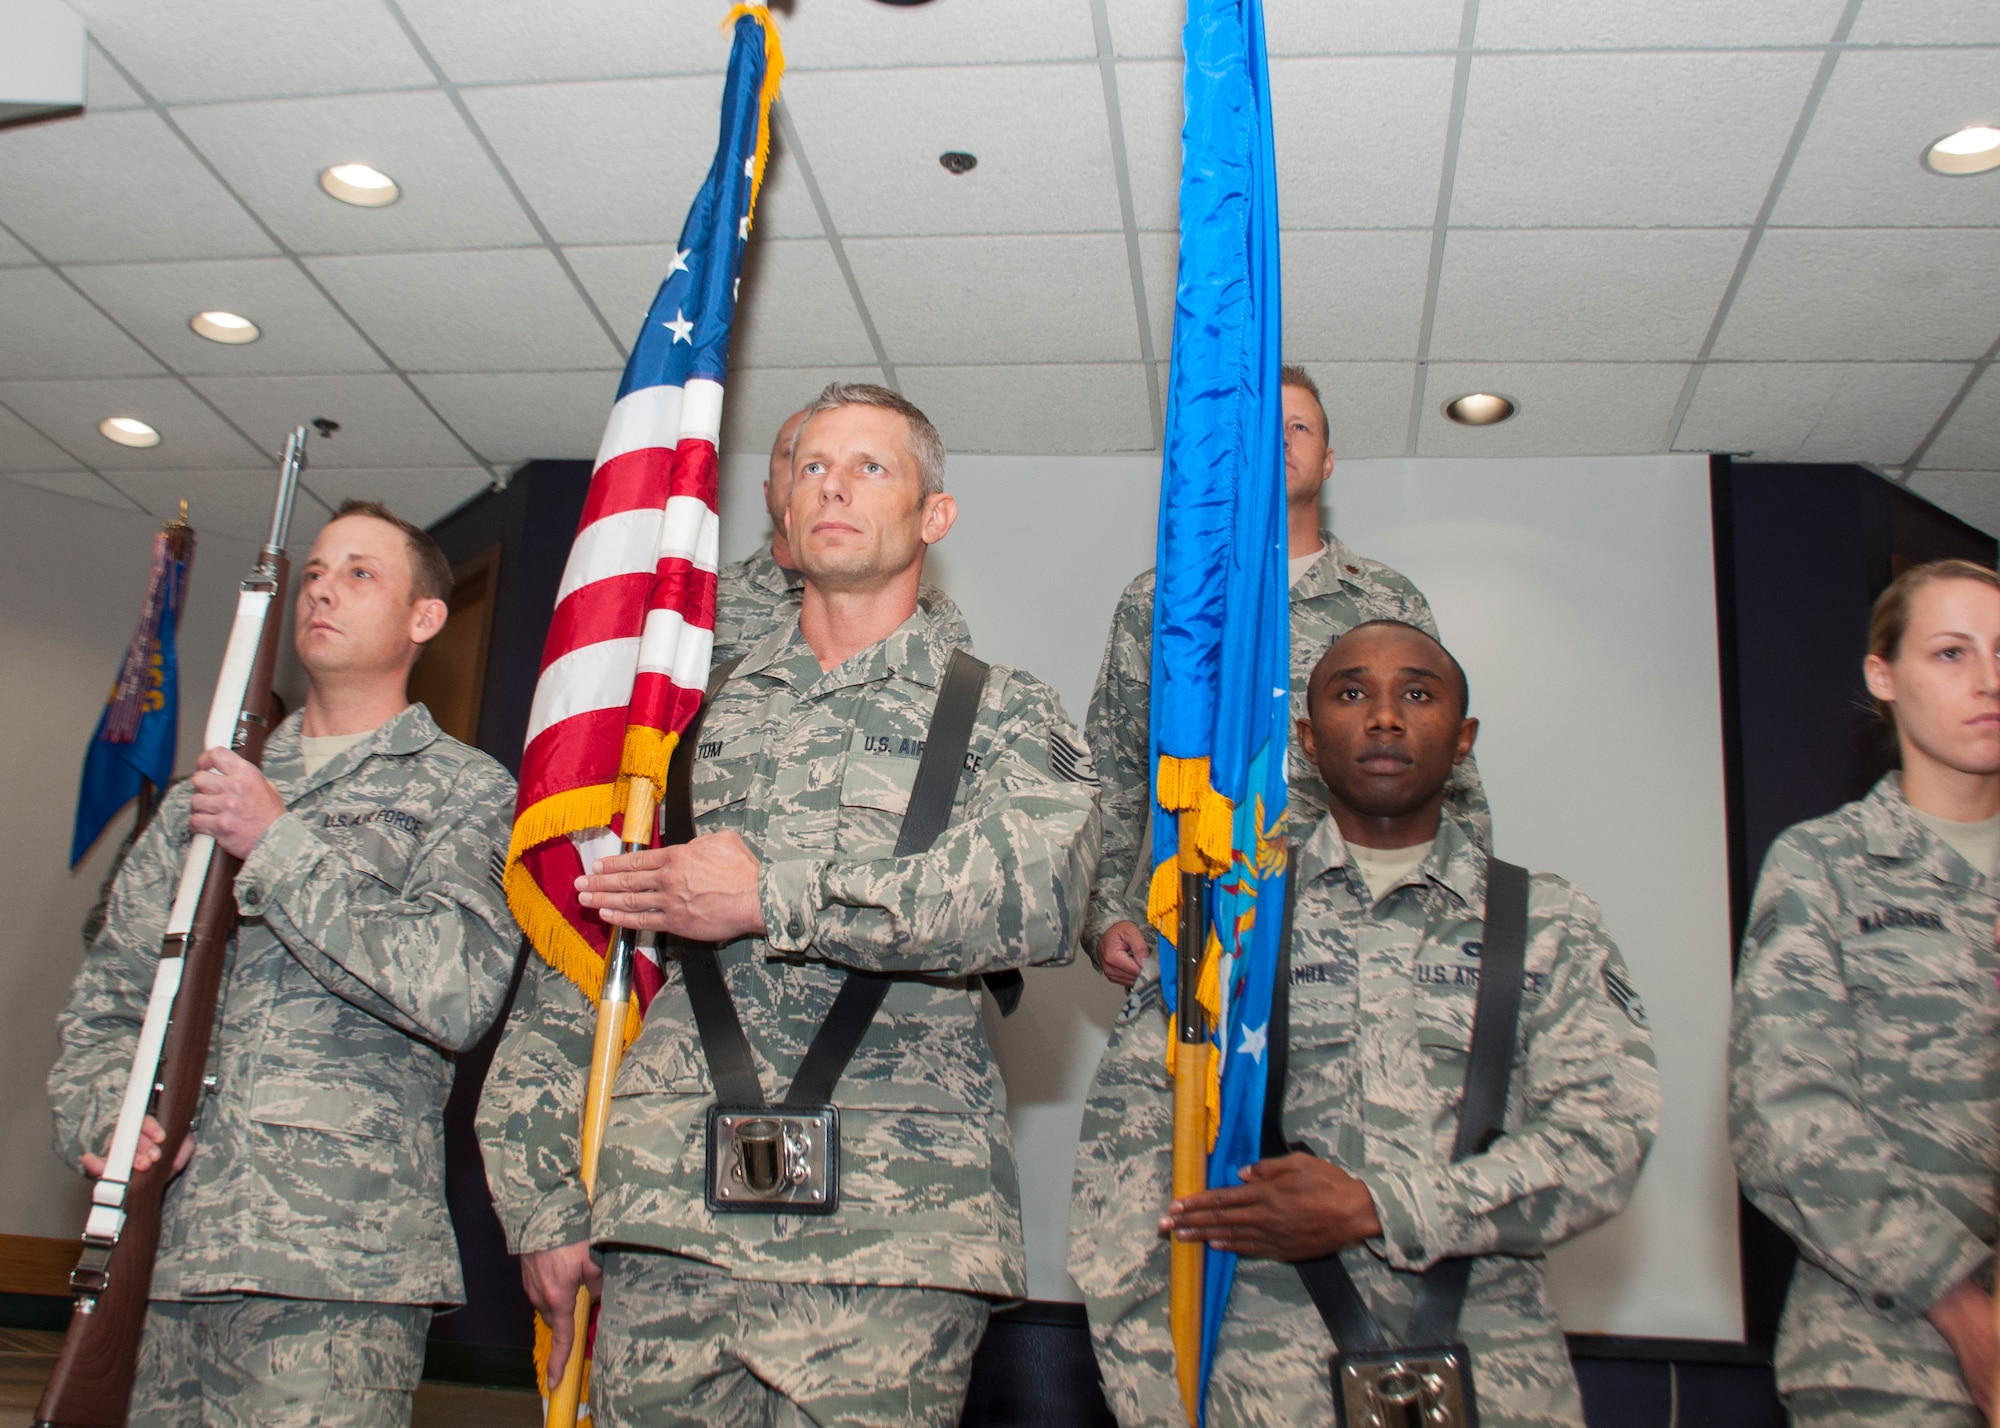 Members of the 507th Air Refueling Wing Honor Guard post the colors during the assumpion of command ceremony for Maj. Ricky Martin II, the new 507th Security Forces Squadron commander, Sept. 11, 2016, at Tinker Air Force Base, Oklahoma. Martin has served in various capacities to include: nuclear security, presidential support, antiterrorism, security forces operations, Iraqi Police transition team and contingency operations. Martin has also worked as a Federal Reserve Law Enforcement Officer in Salt Lake, Utah.  Prior to arriving at Tinker, Martin commanded the 99th Security Forces Squadron at Nellis Air Force Base, Nevada, comprised of 350 military and civilian personnel.  (U.S. Air Force photo/Master Sgt. Grady Epperly)